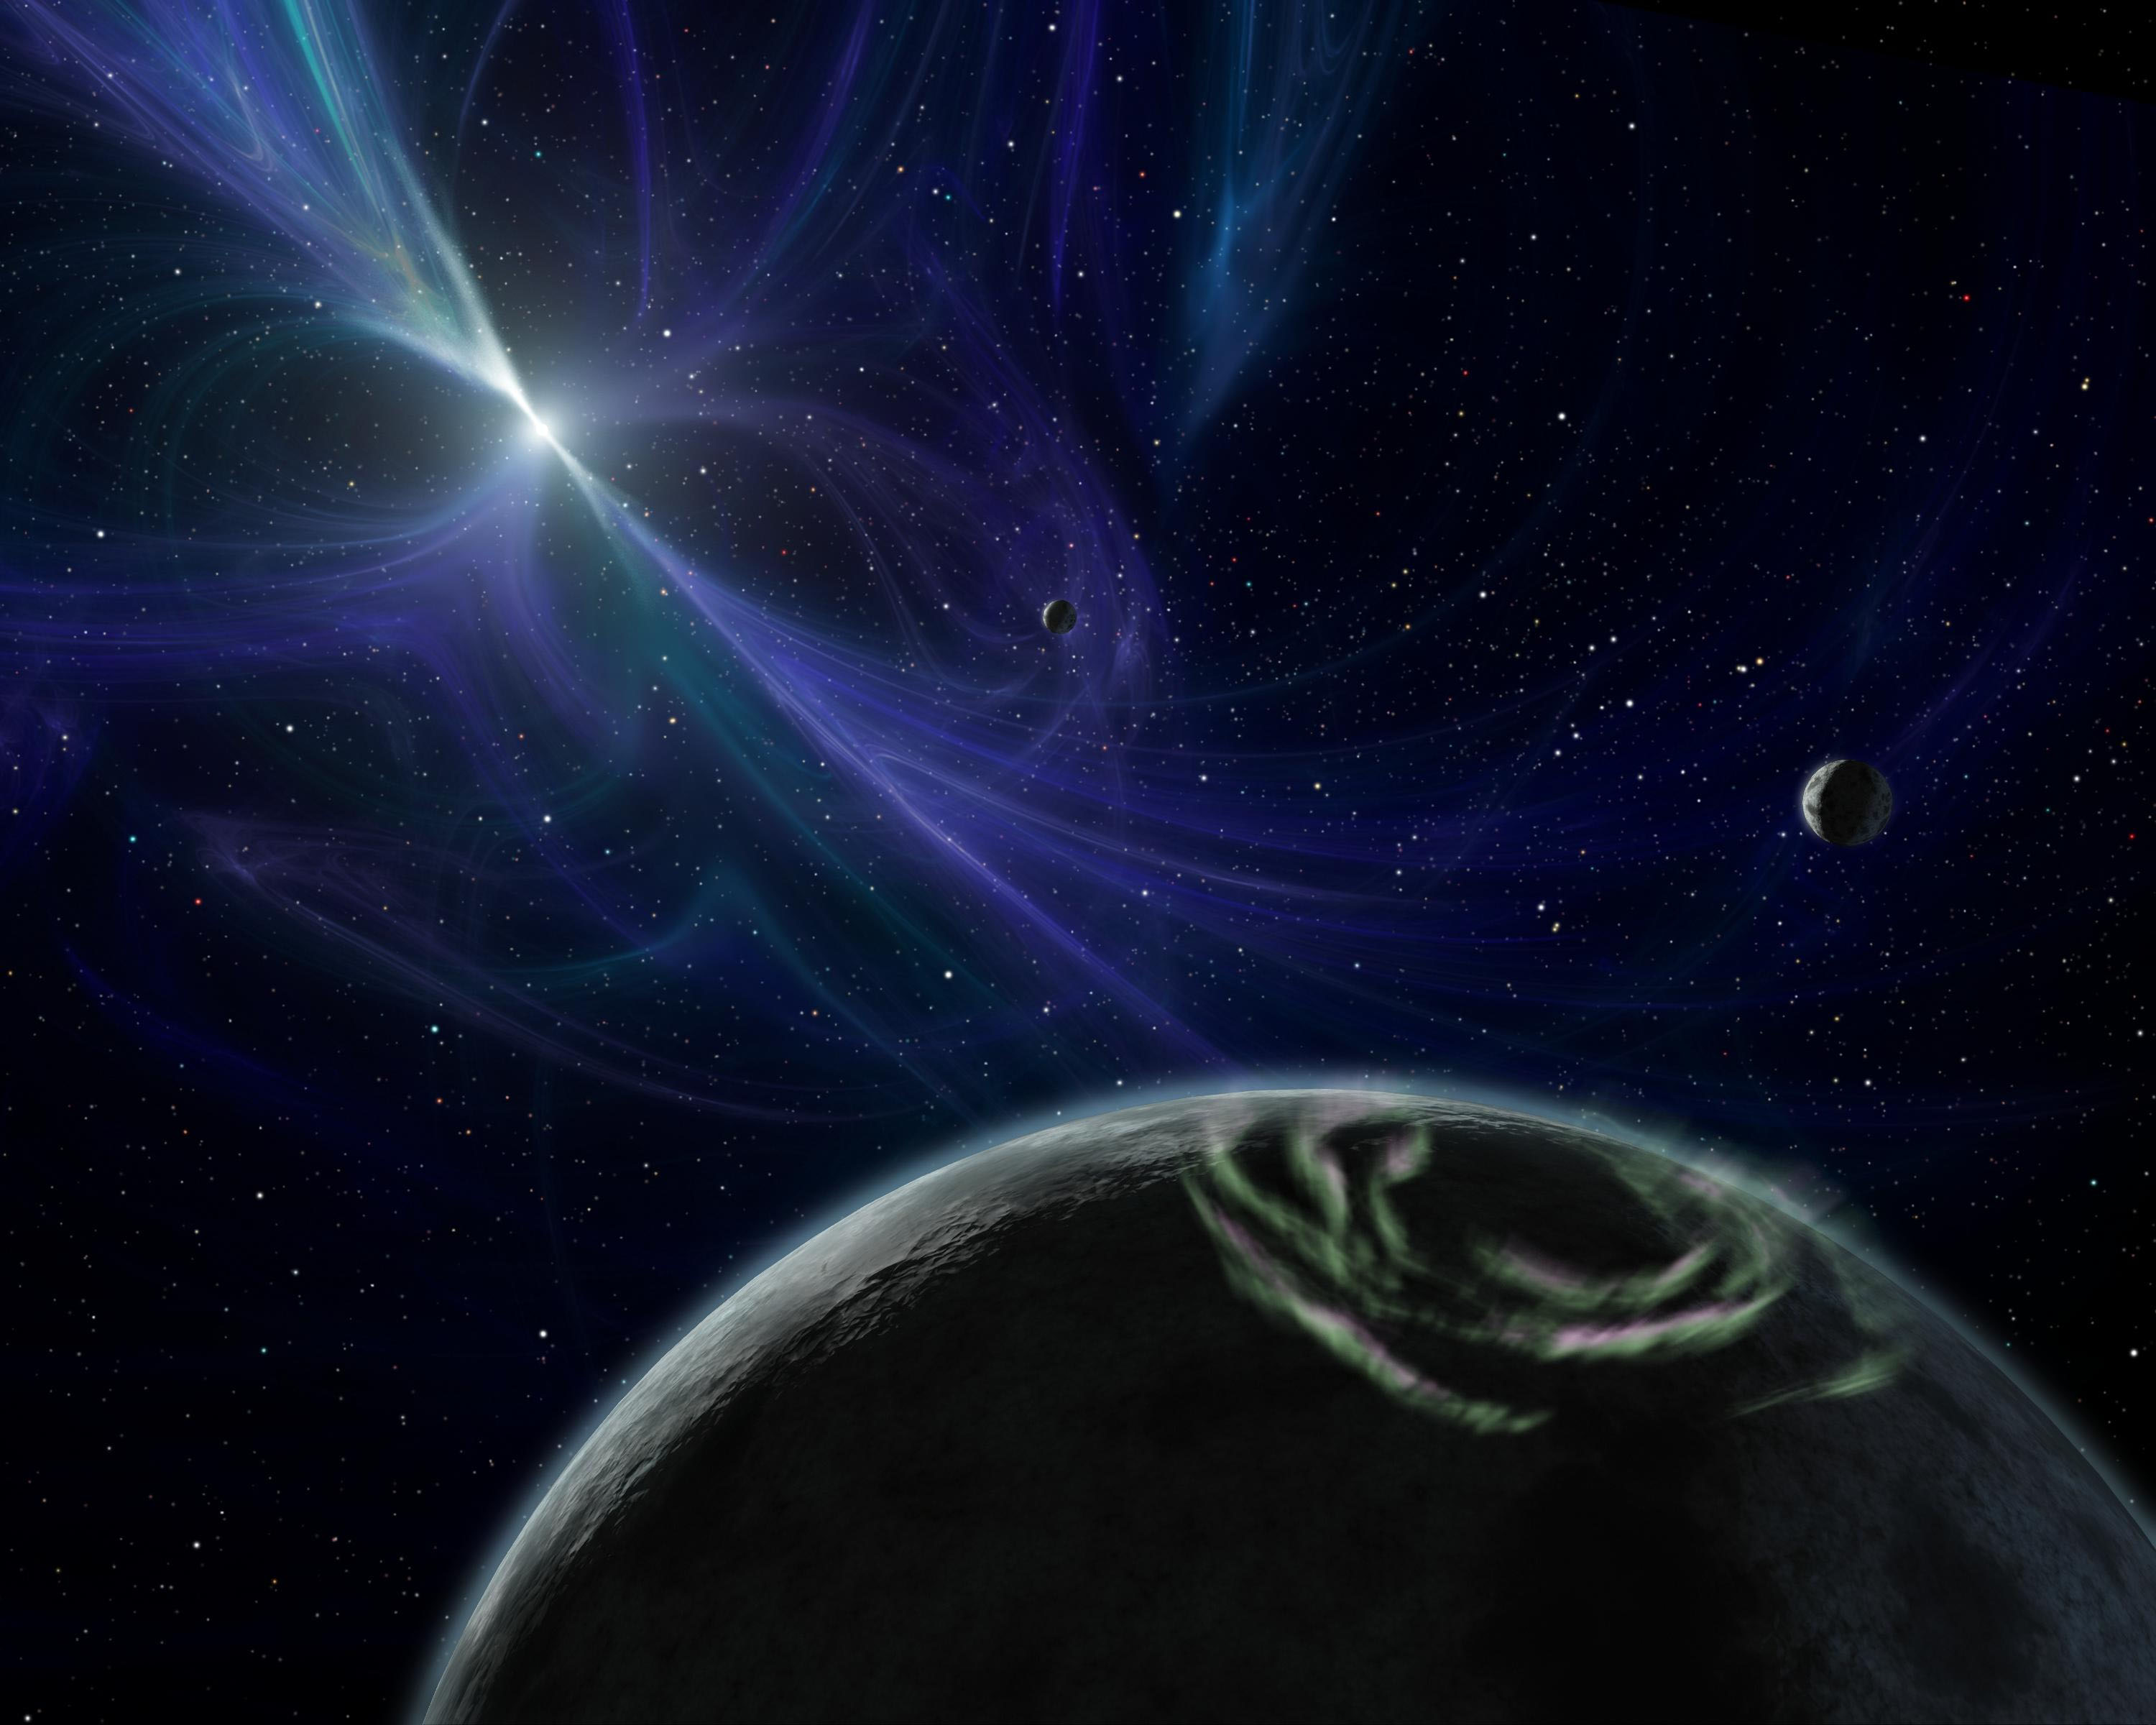 An illustration of a pulsar blasting an Earth-like world with deadly radiation